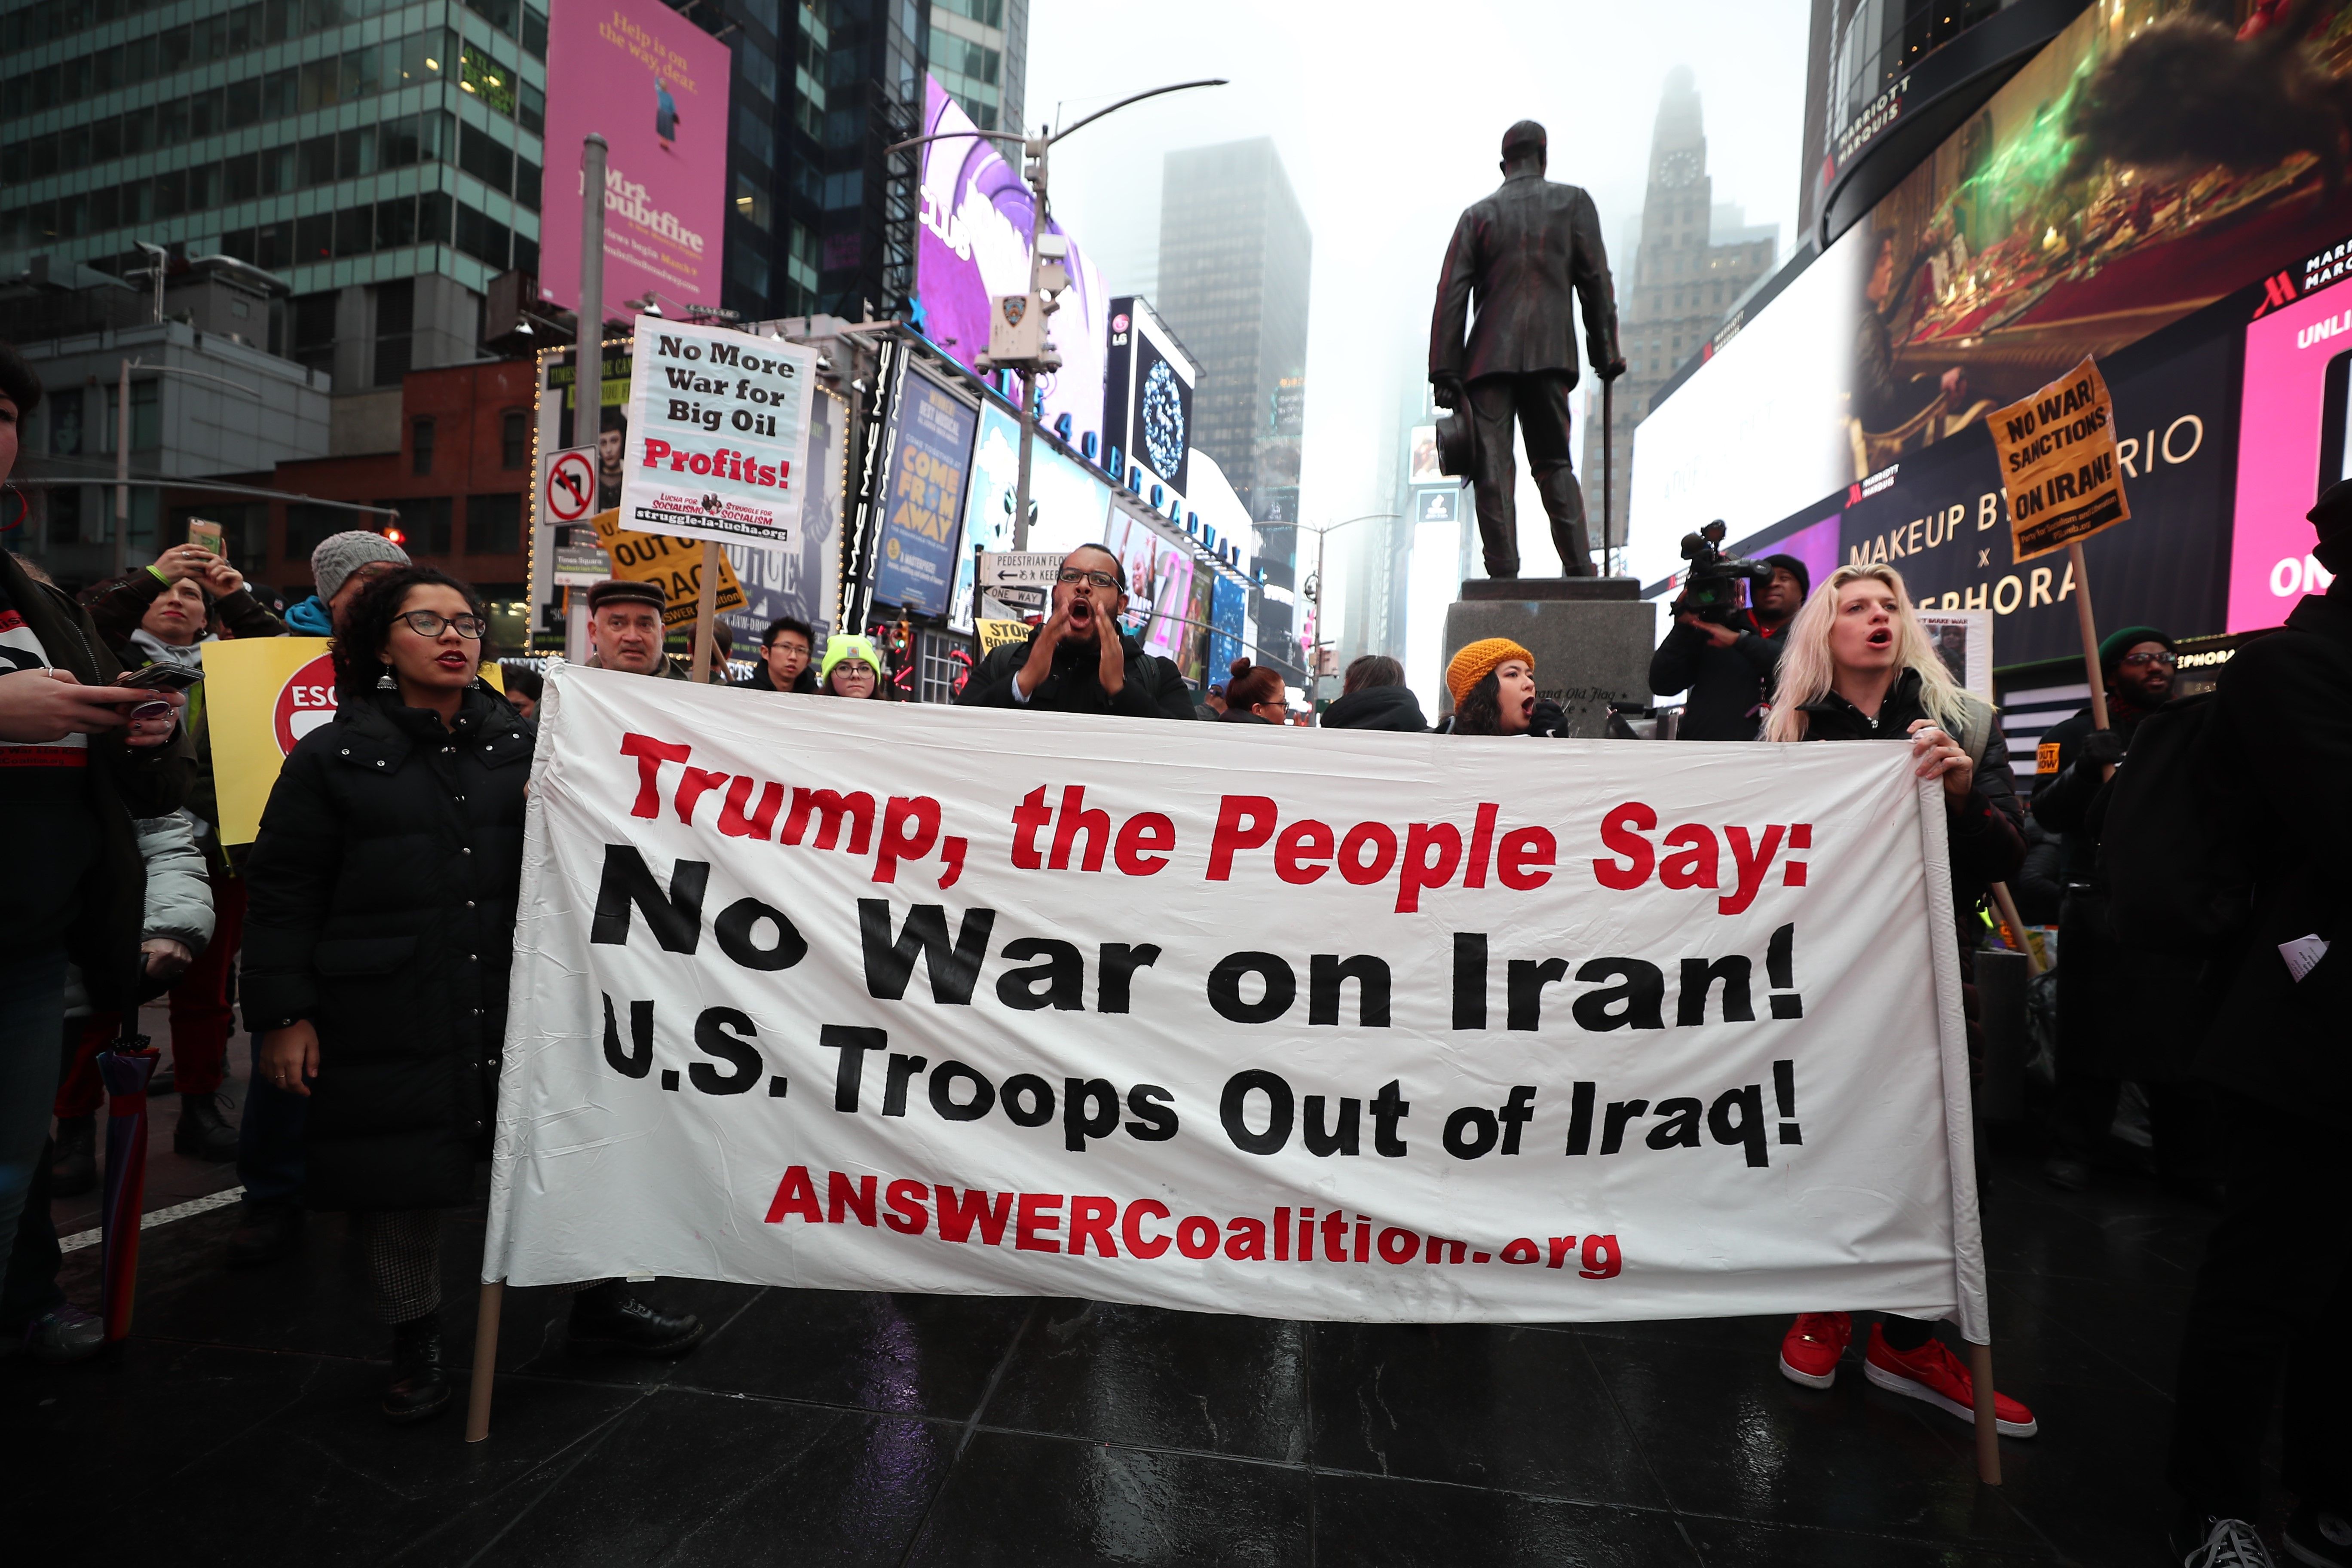 Anti-war activists hold banners during a protestin New York